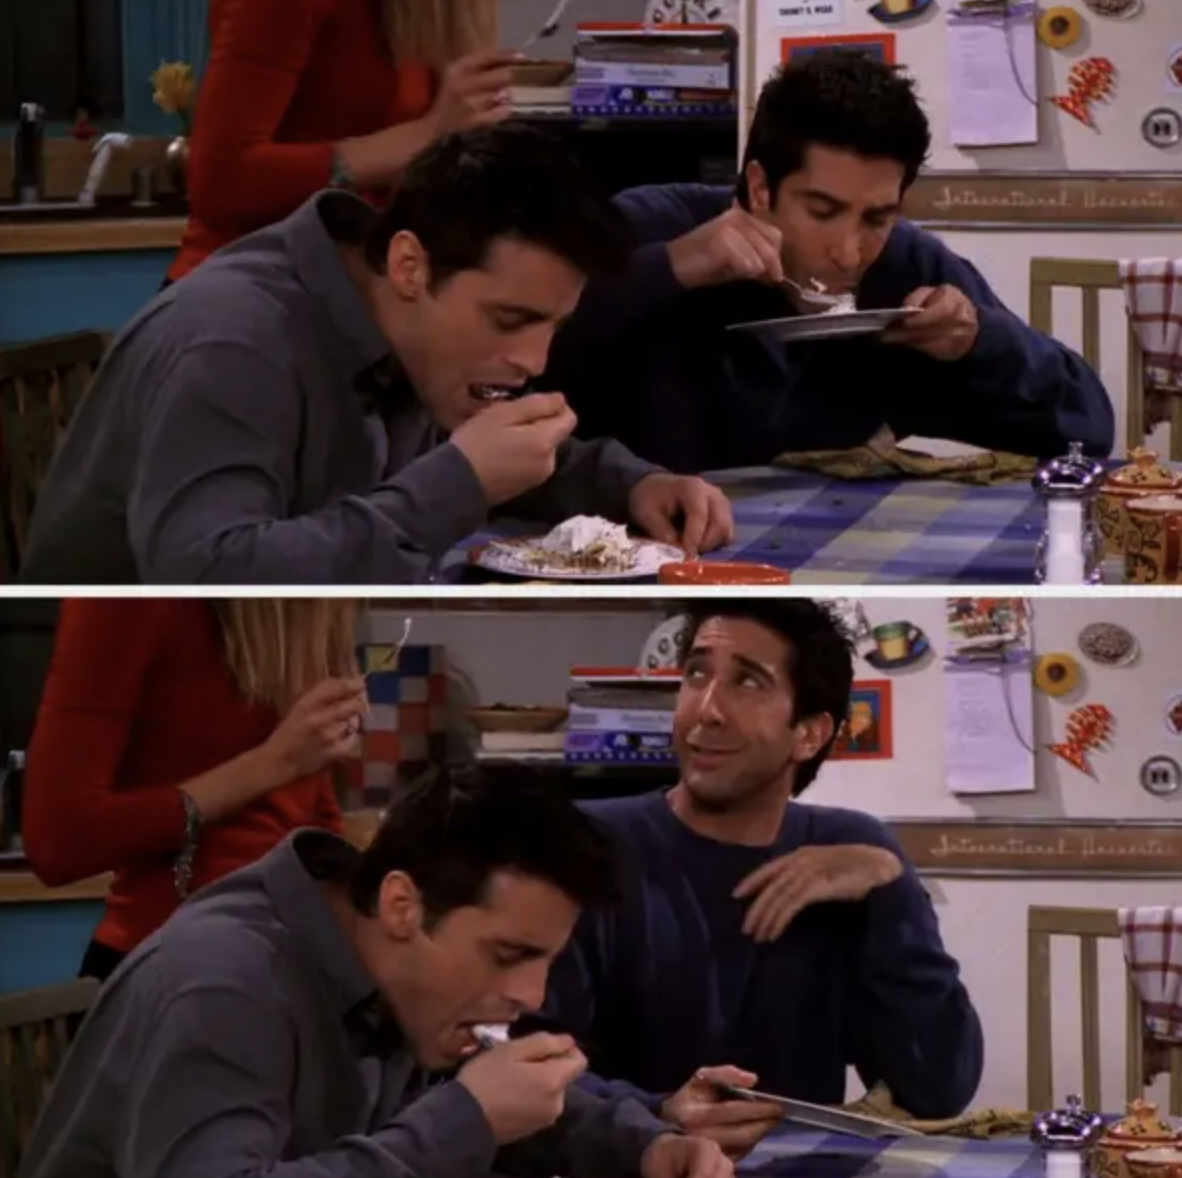 Ross and Joey from Friends eat dessert at a kitchen table, showing a humorous moment